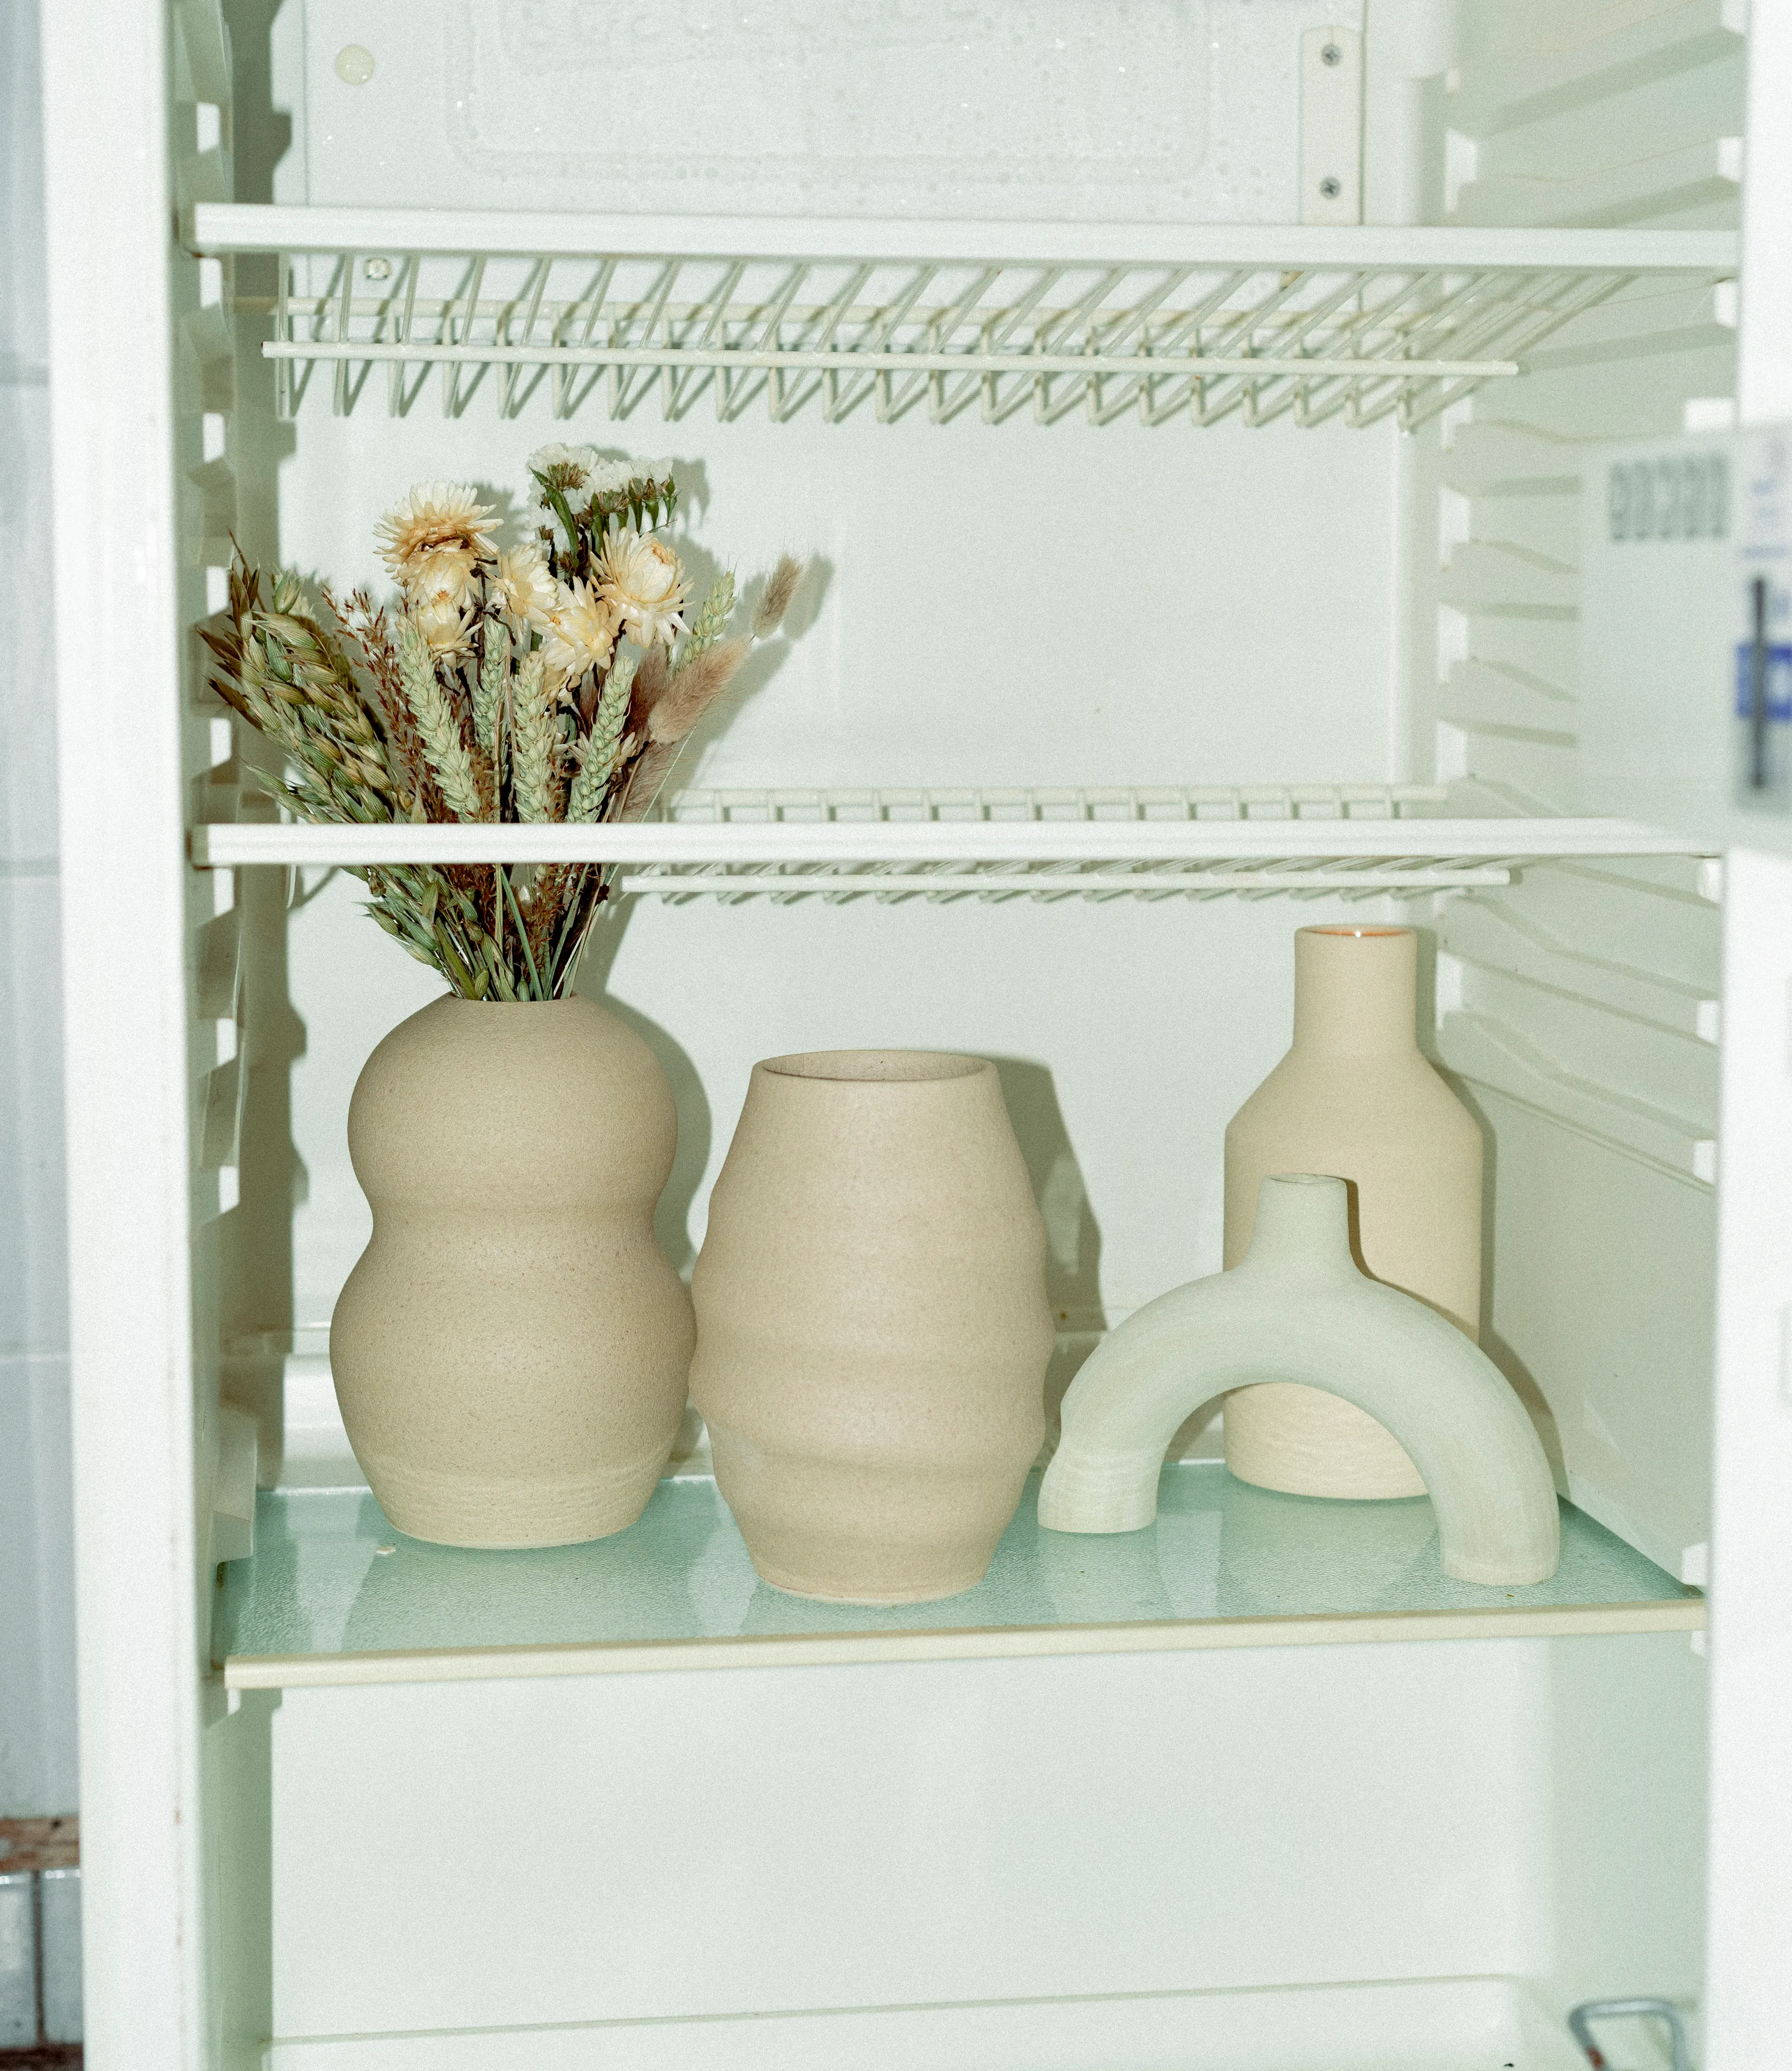 A selection of Ocactuu's and Nova Casa Atlantica's items showcased in a vintage fridge with dried flowers. All of the products are light and beige.